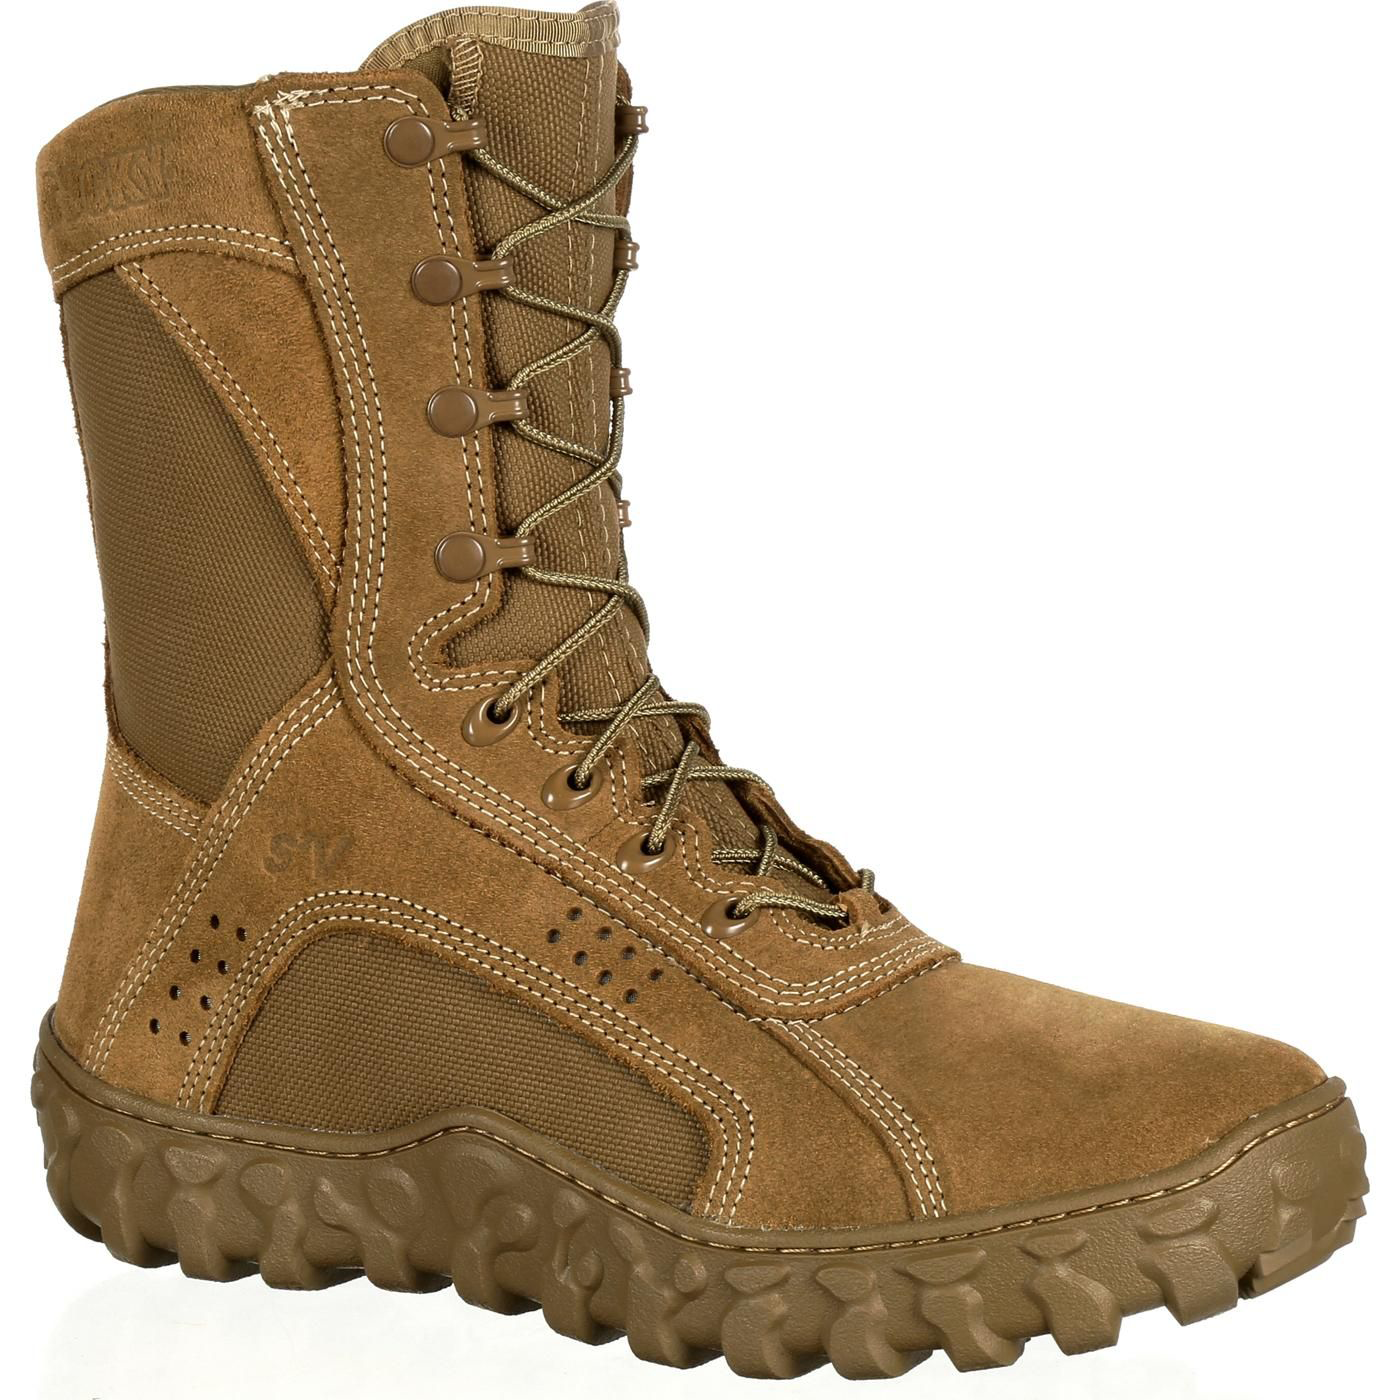 Rocky S2V Tactical Military Boots for Men - Coyote Brown - 11M